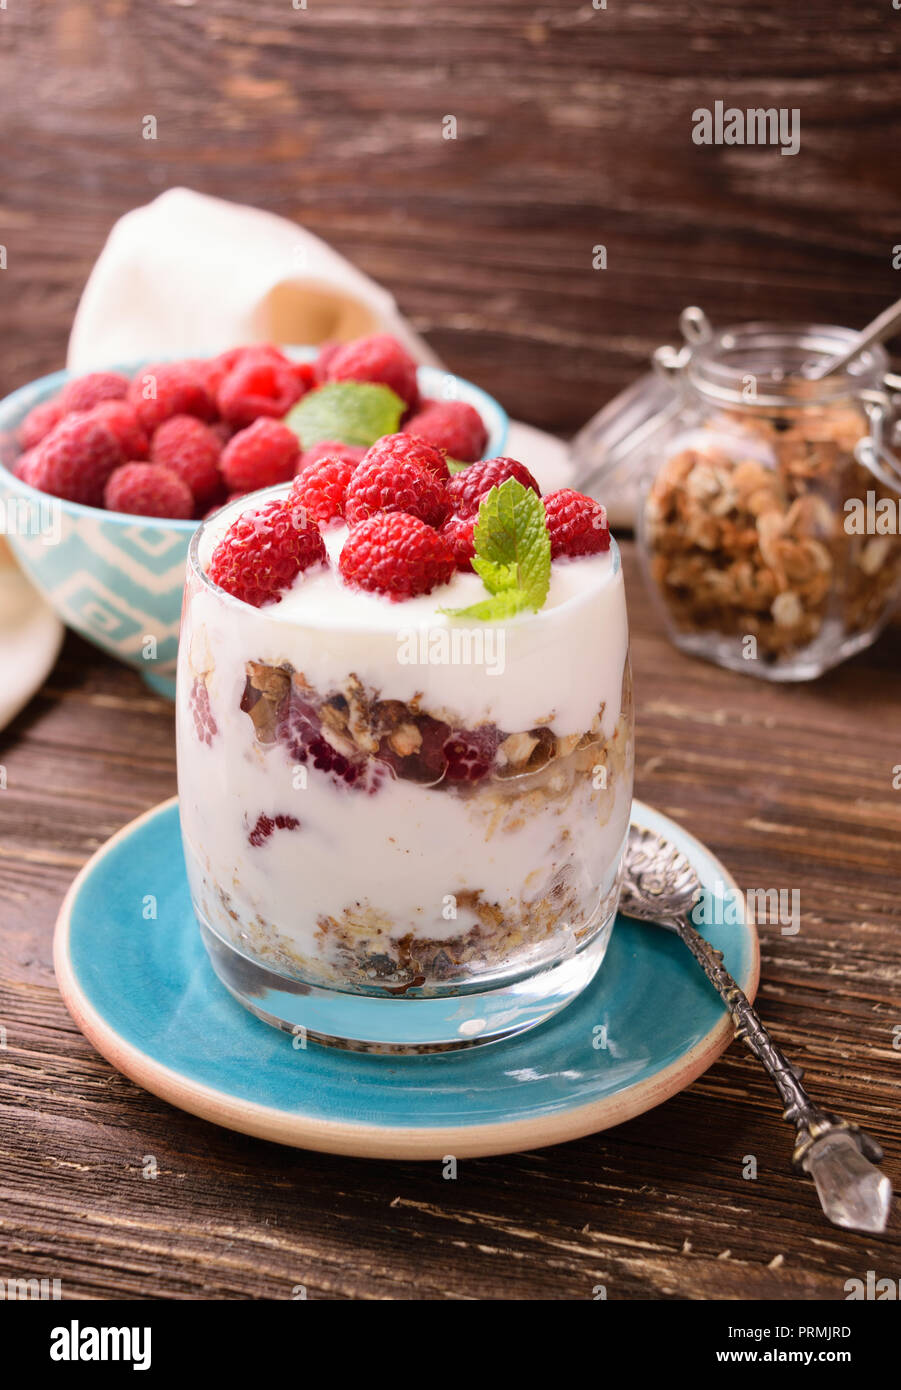 Layered yogurt with granola and raspberries. In a glass, decorated with mint leaves. On dark rustic wooden table background. Healthy food concept. Stock Photo